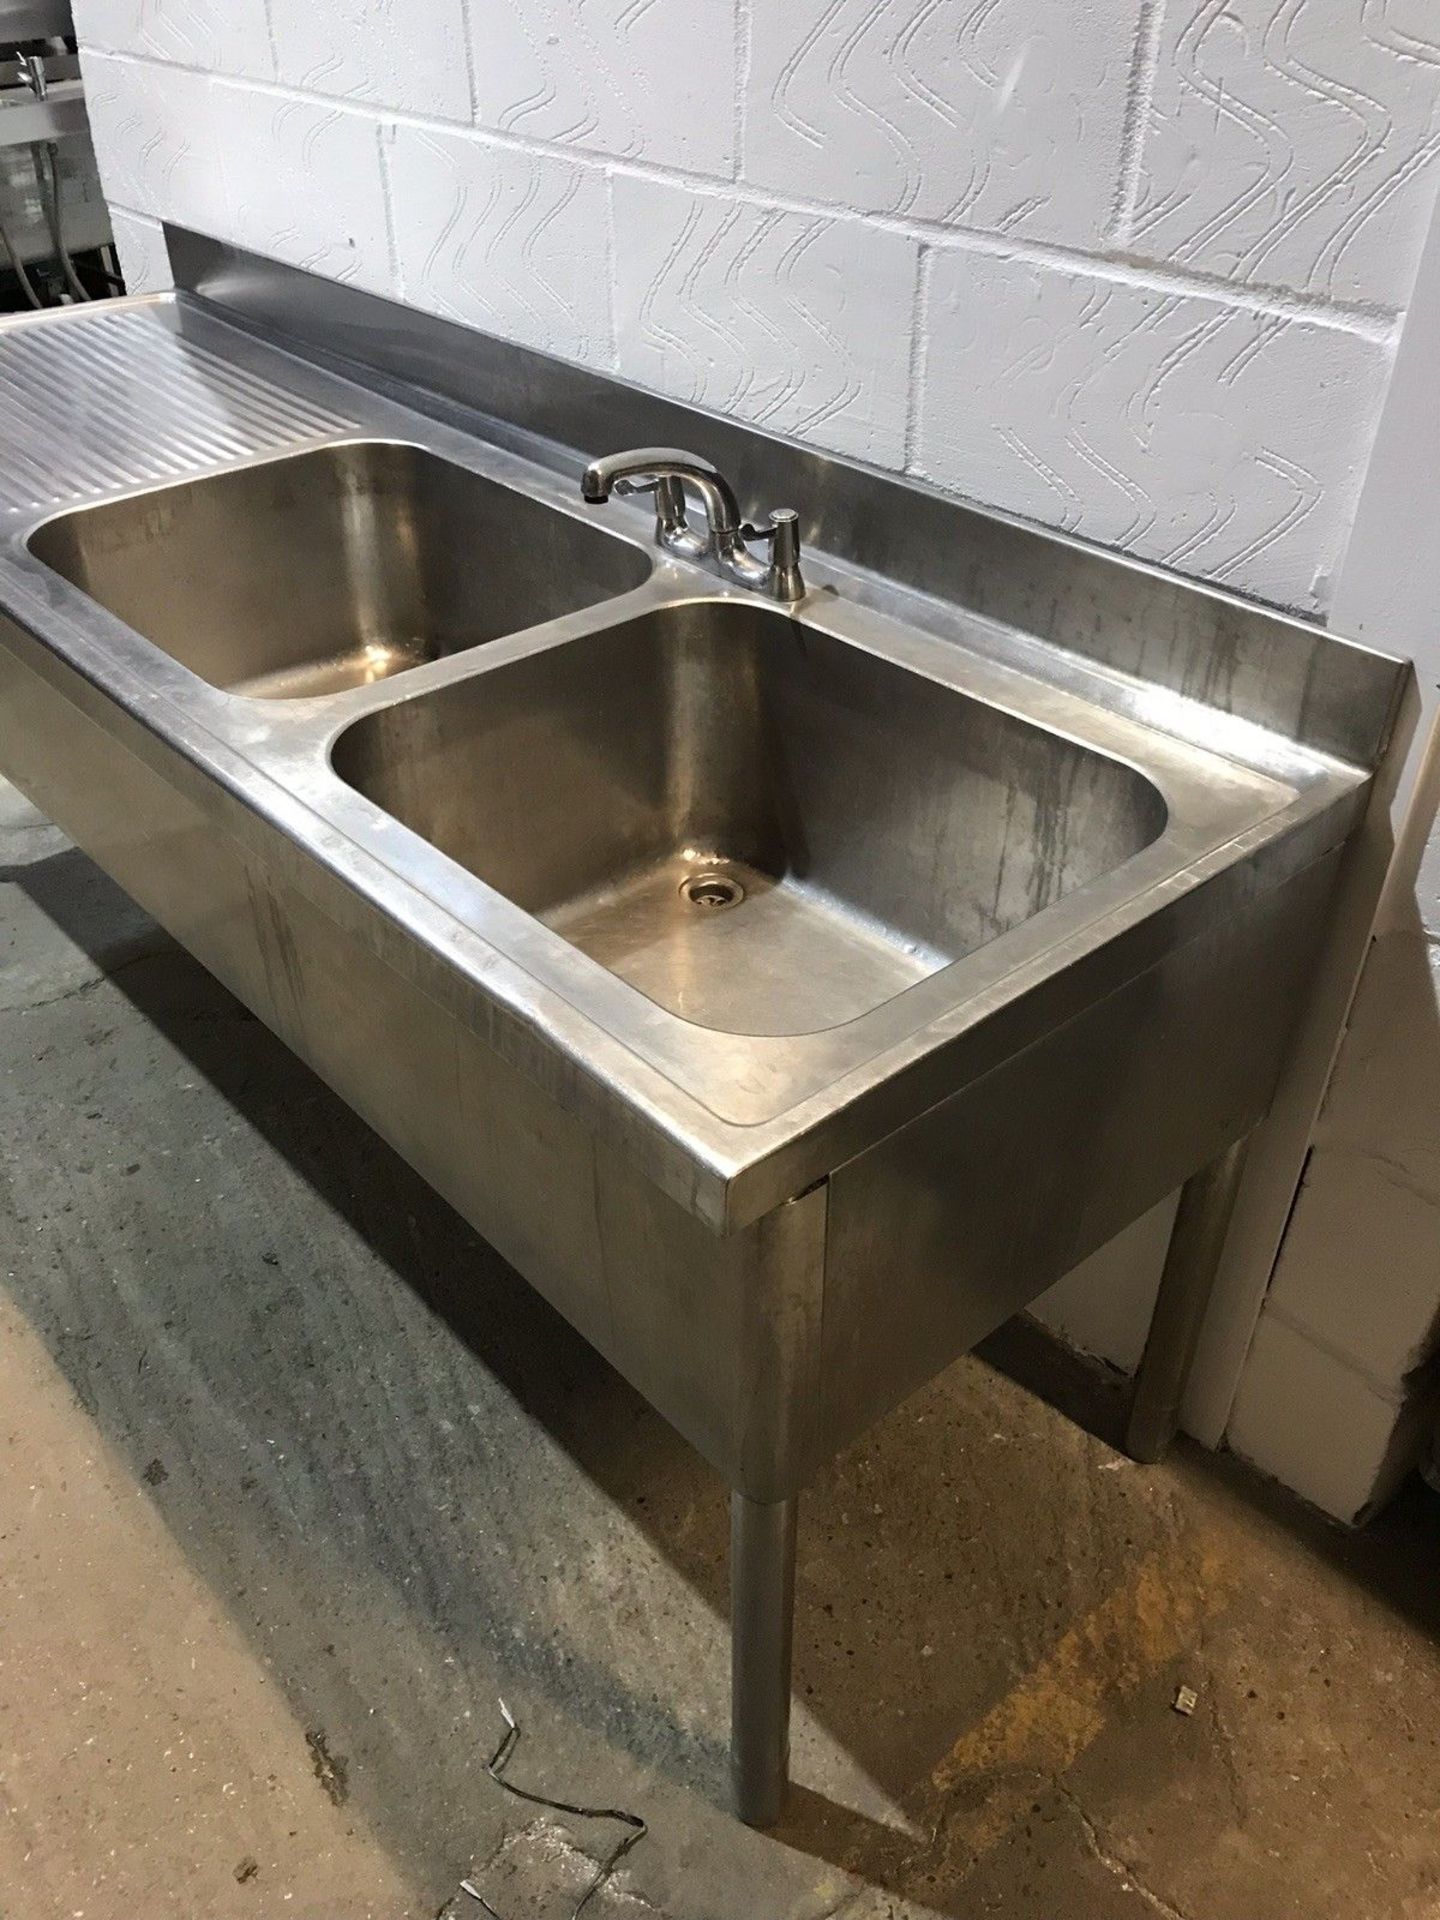 Stainless Steel Double Bowl Sink With Lefthand Drainer, Upstand and Shelf - Image 3 of 6